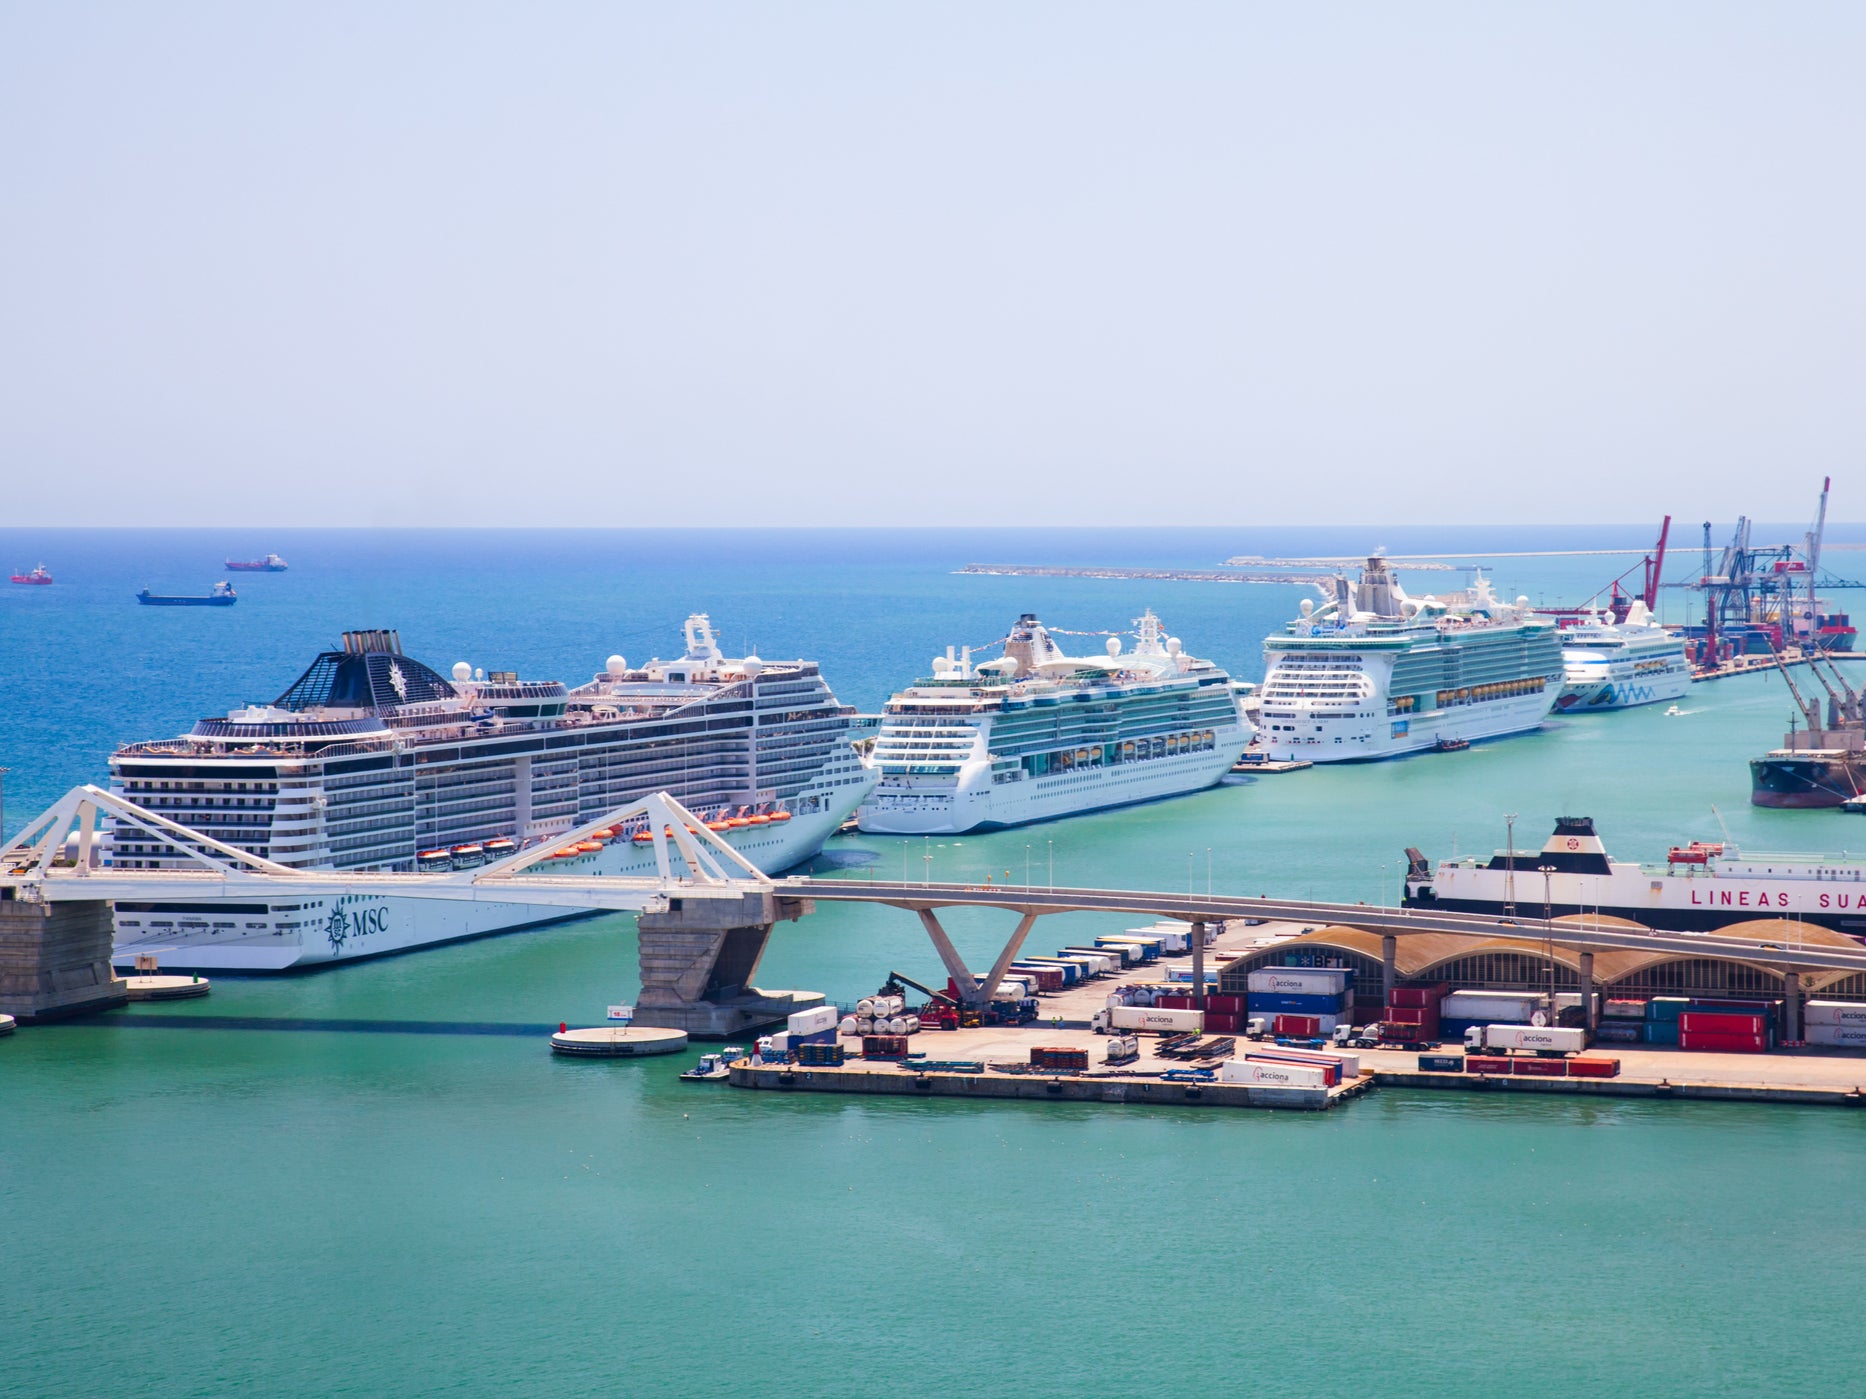 Cruise ship numbers are being limited in Barcelona